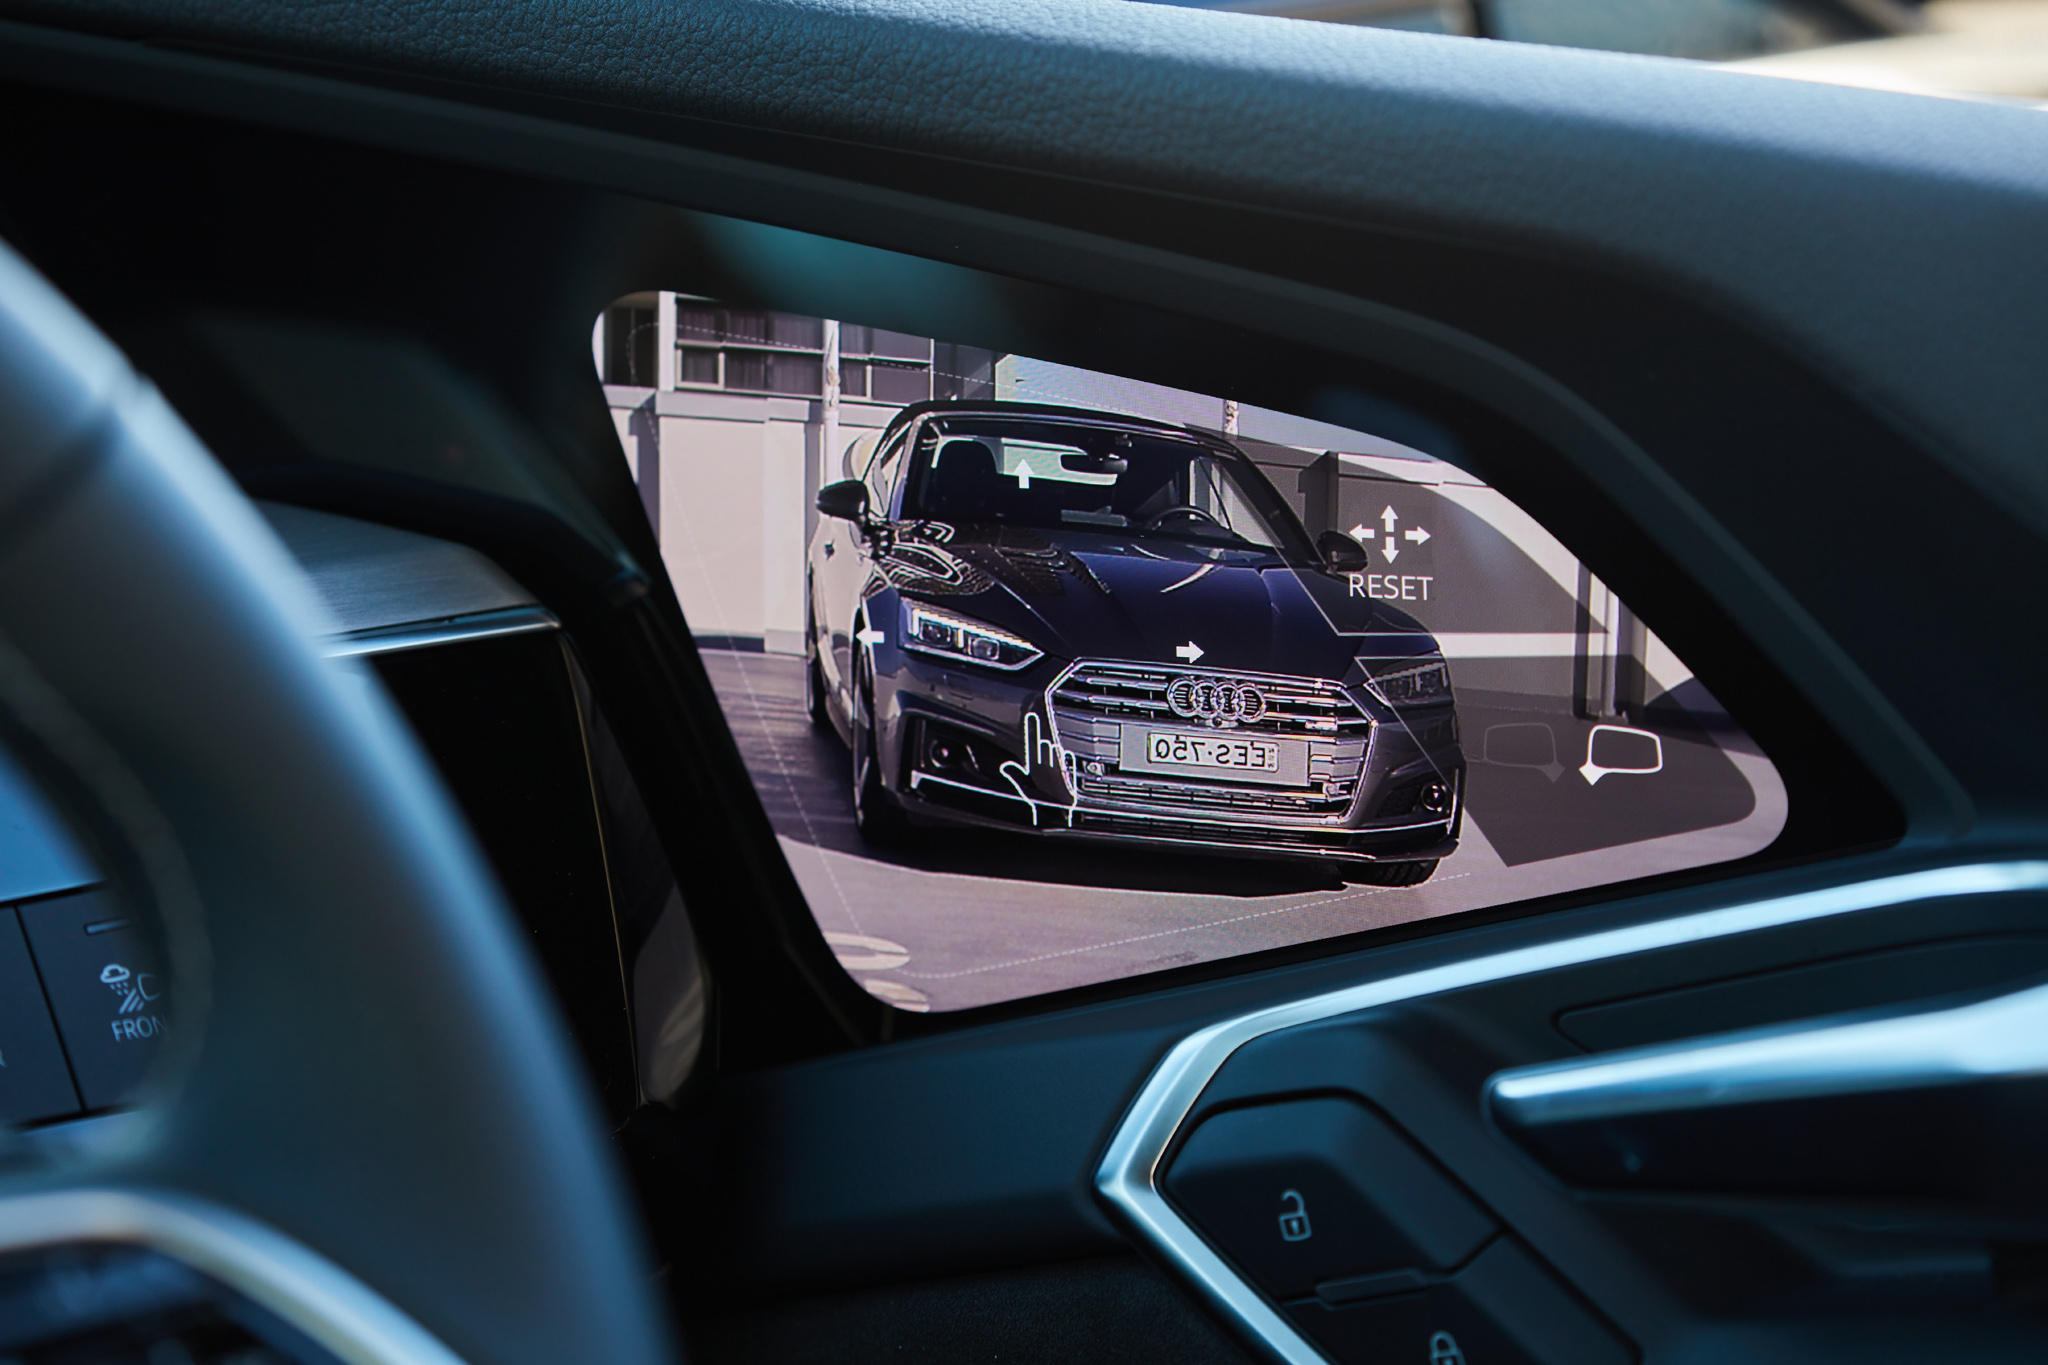 Audi e-tron SUV displayed on a cars virtual cockpit screen, highlighting the advanced electric vehicle technology.